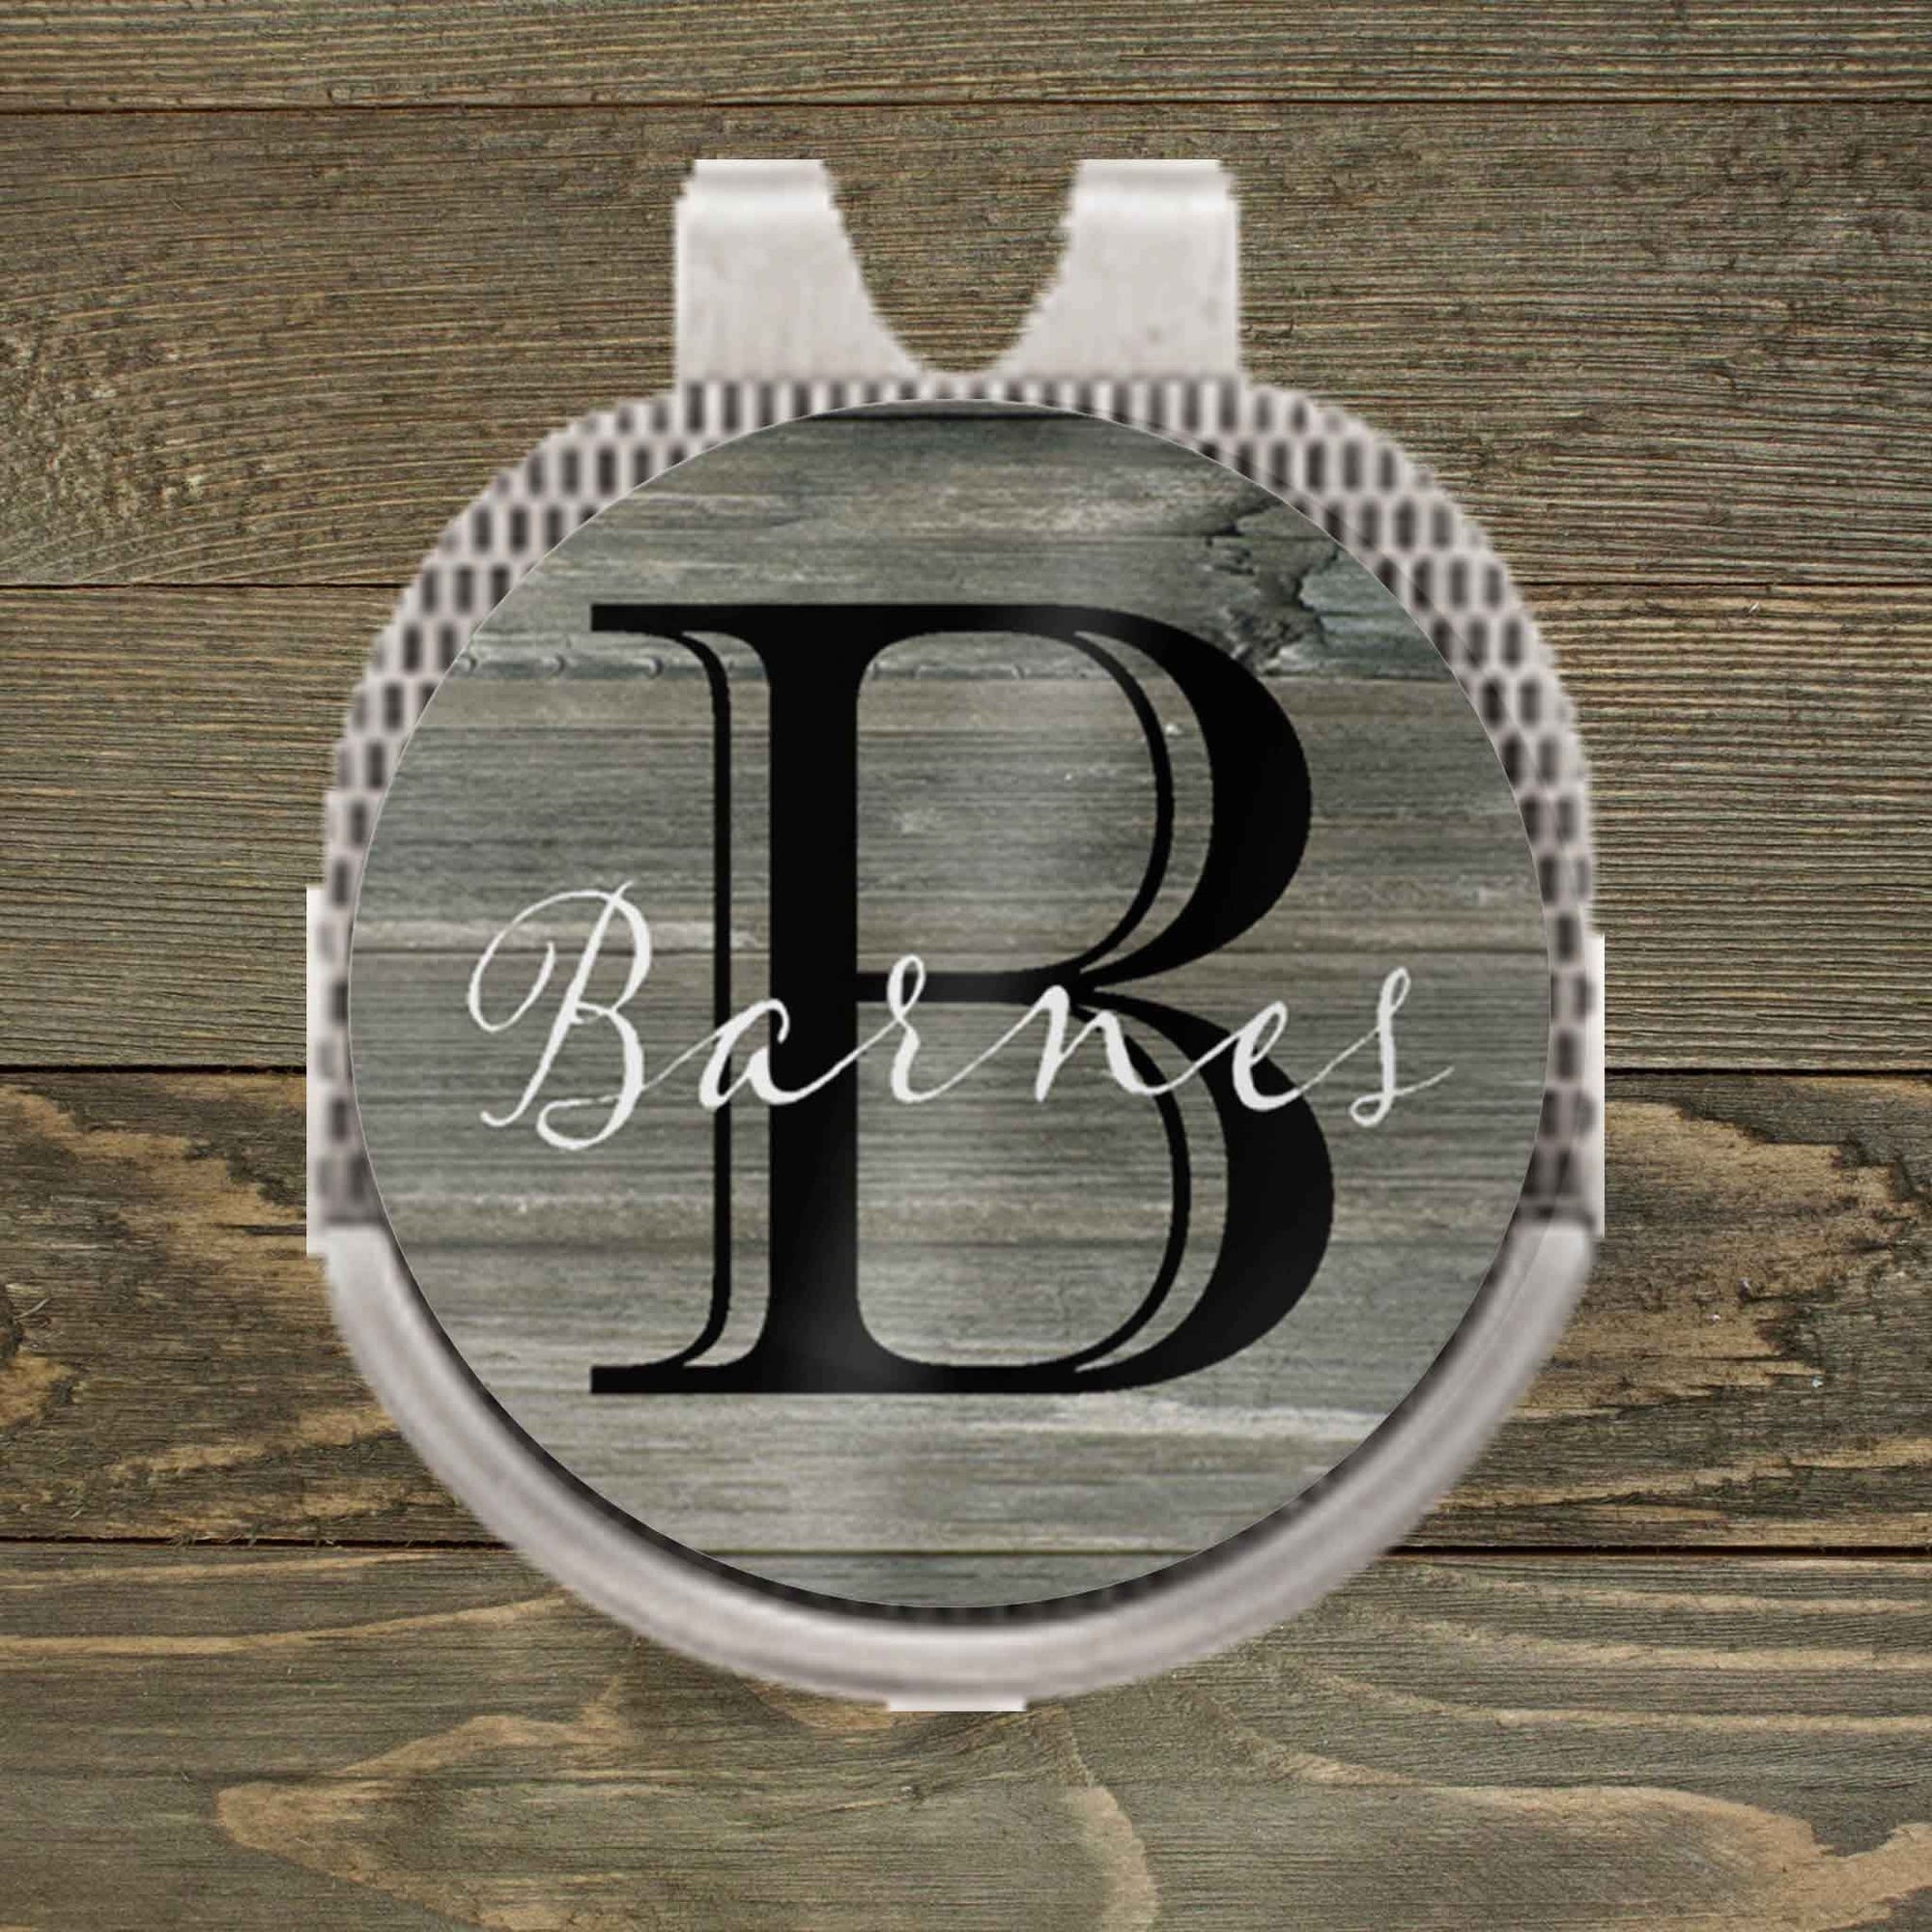 Personalized Ball Marker | Hat Clip Ball Marker | Golf Gifts | Rustic Monogram